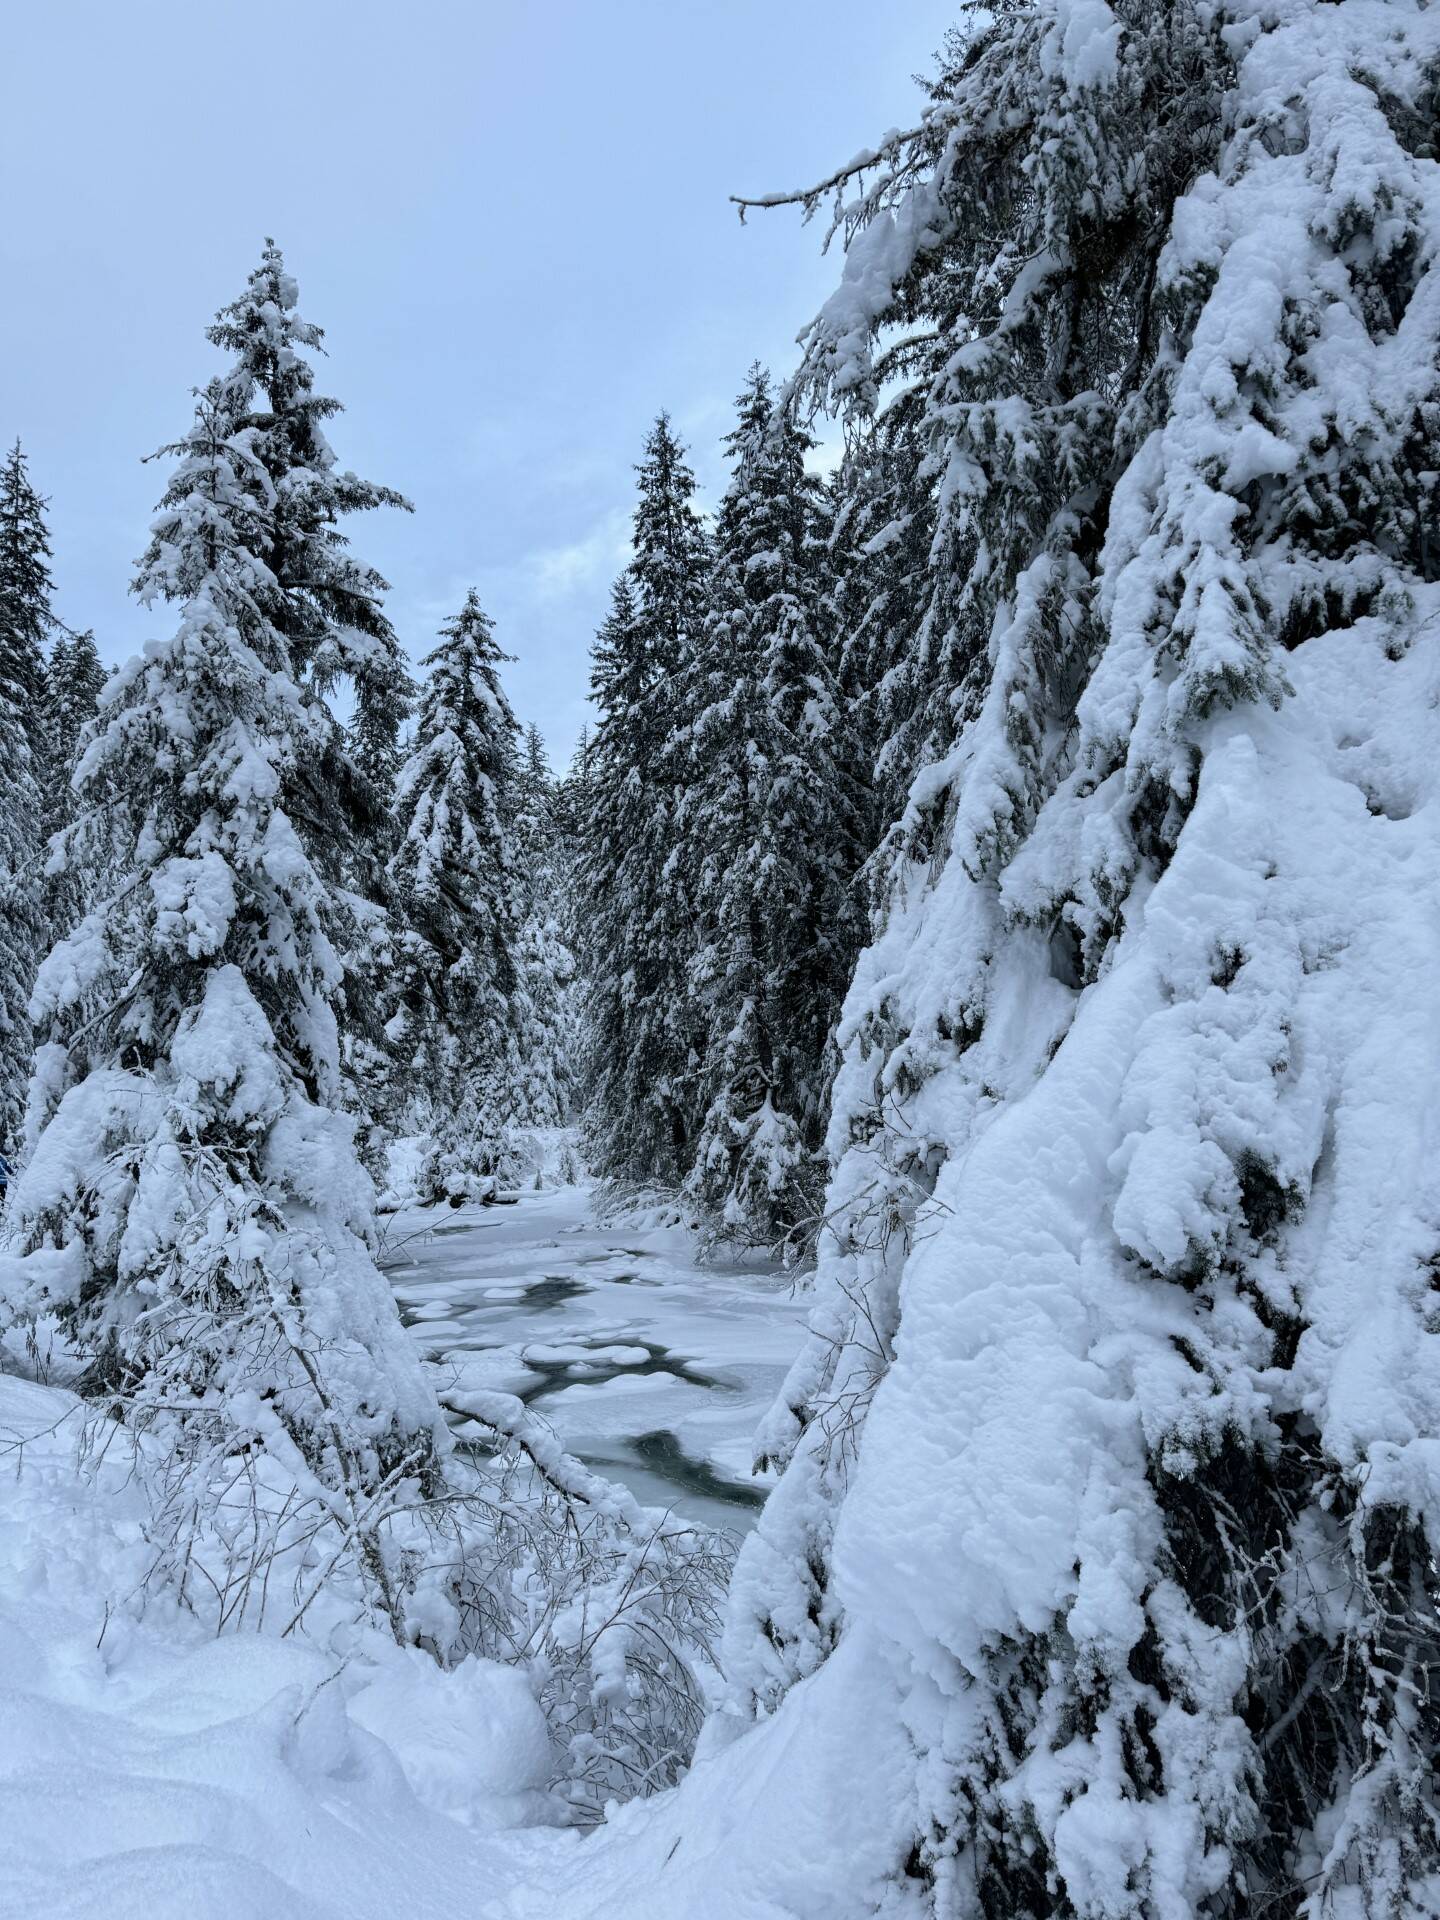 Patches of open water are seen under the snow cover along the Montana Creek Trail on Jan. 21. (Photo by Deana Barajas)